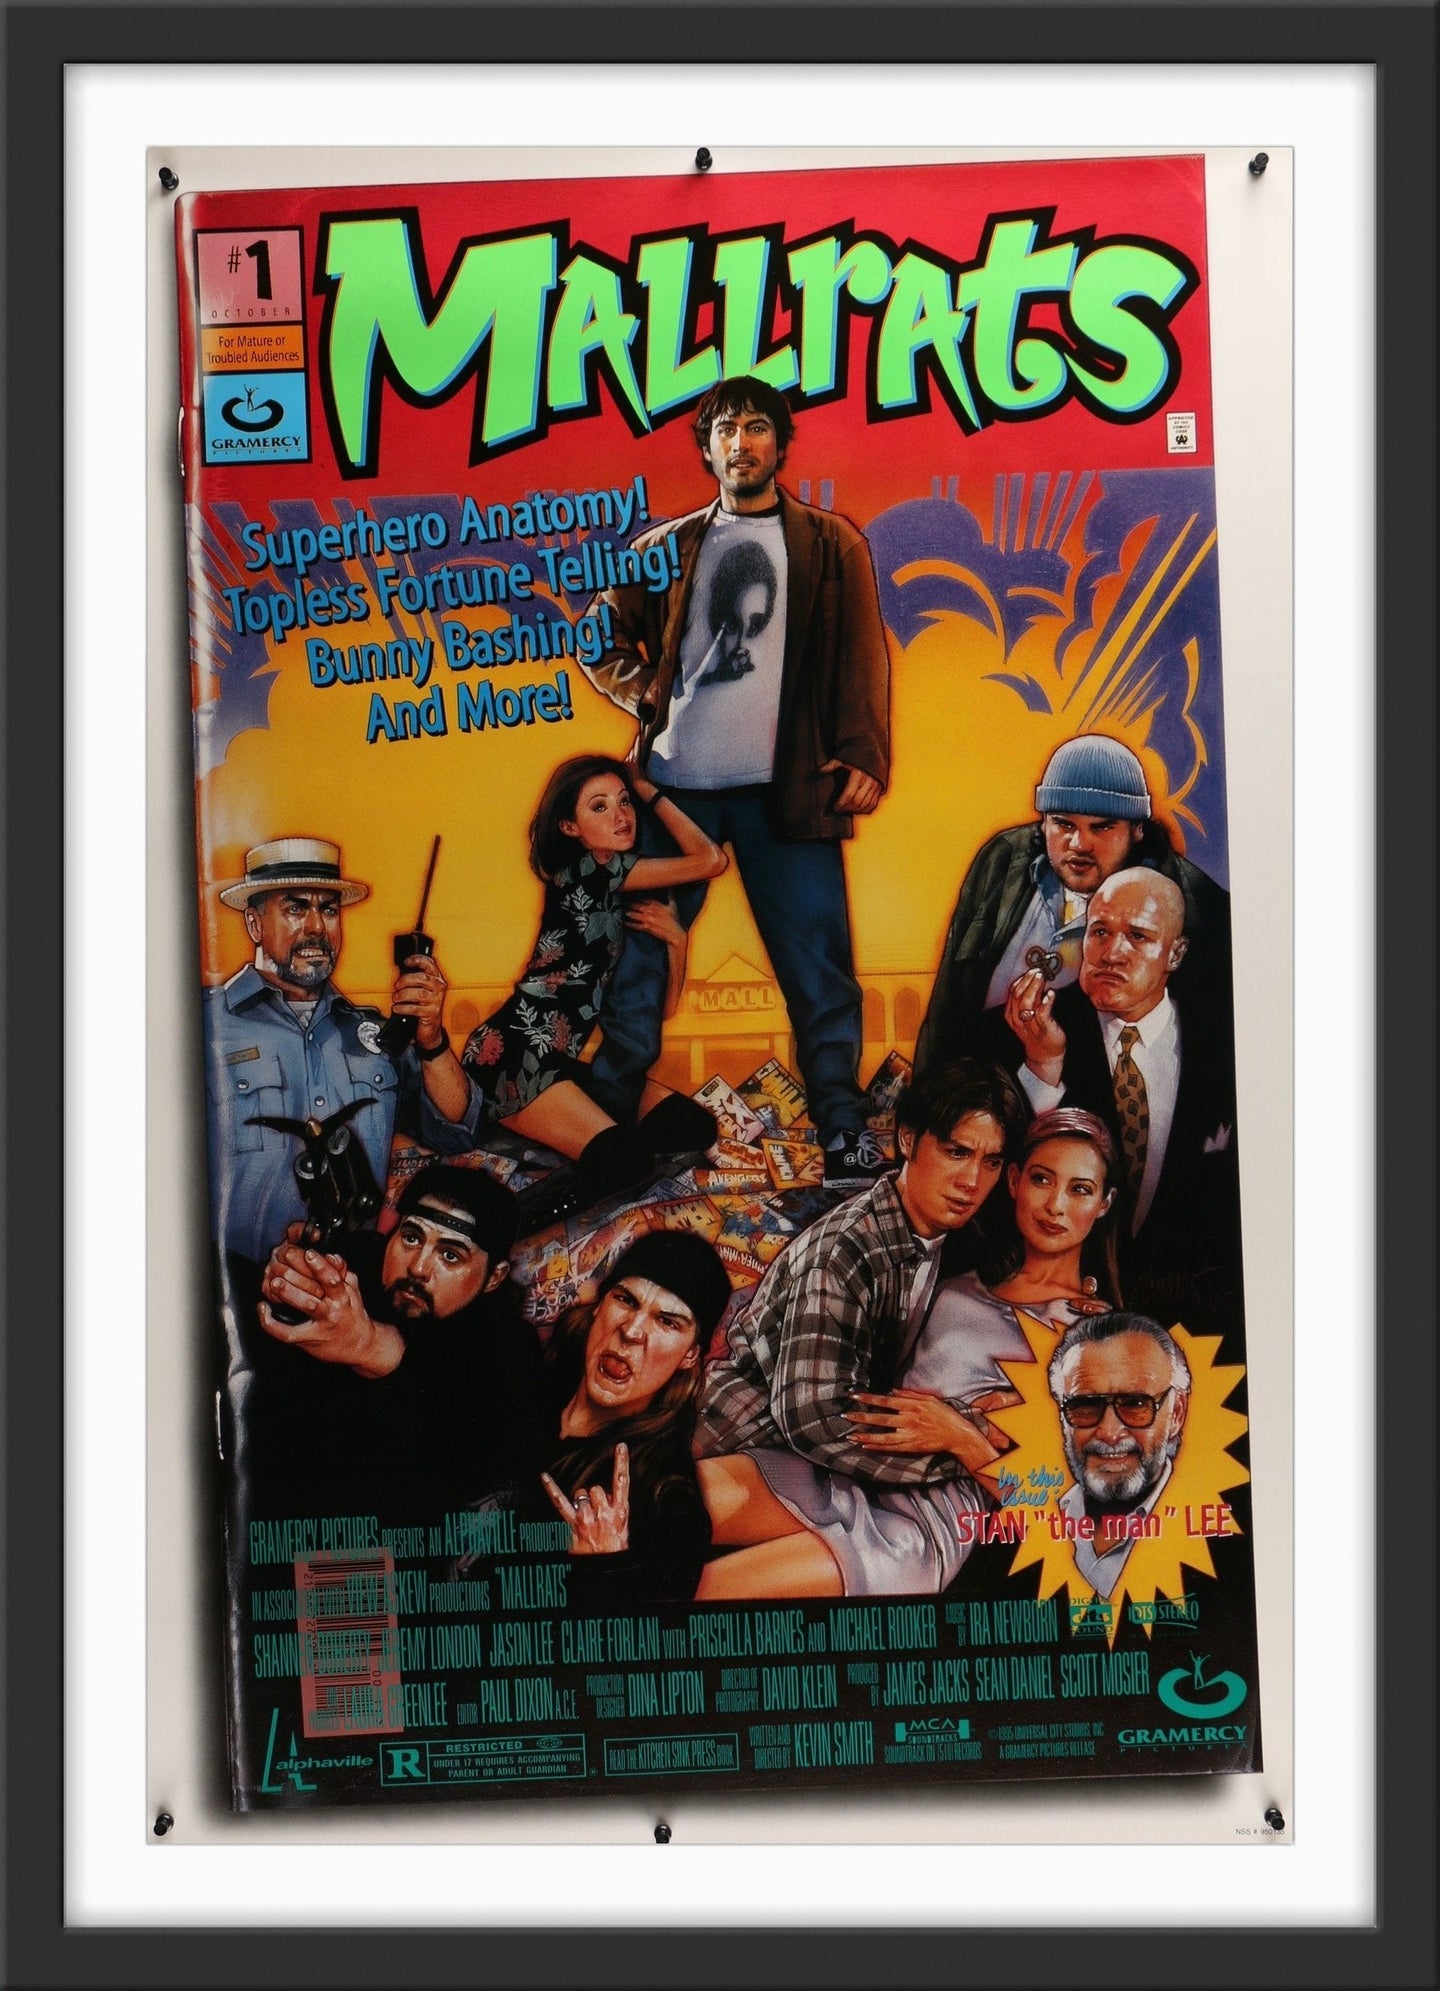 An original movie poster for the film Mallrats